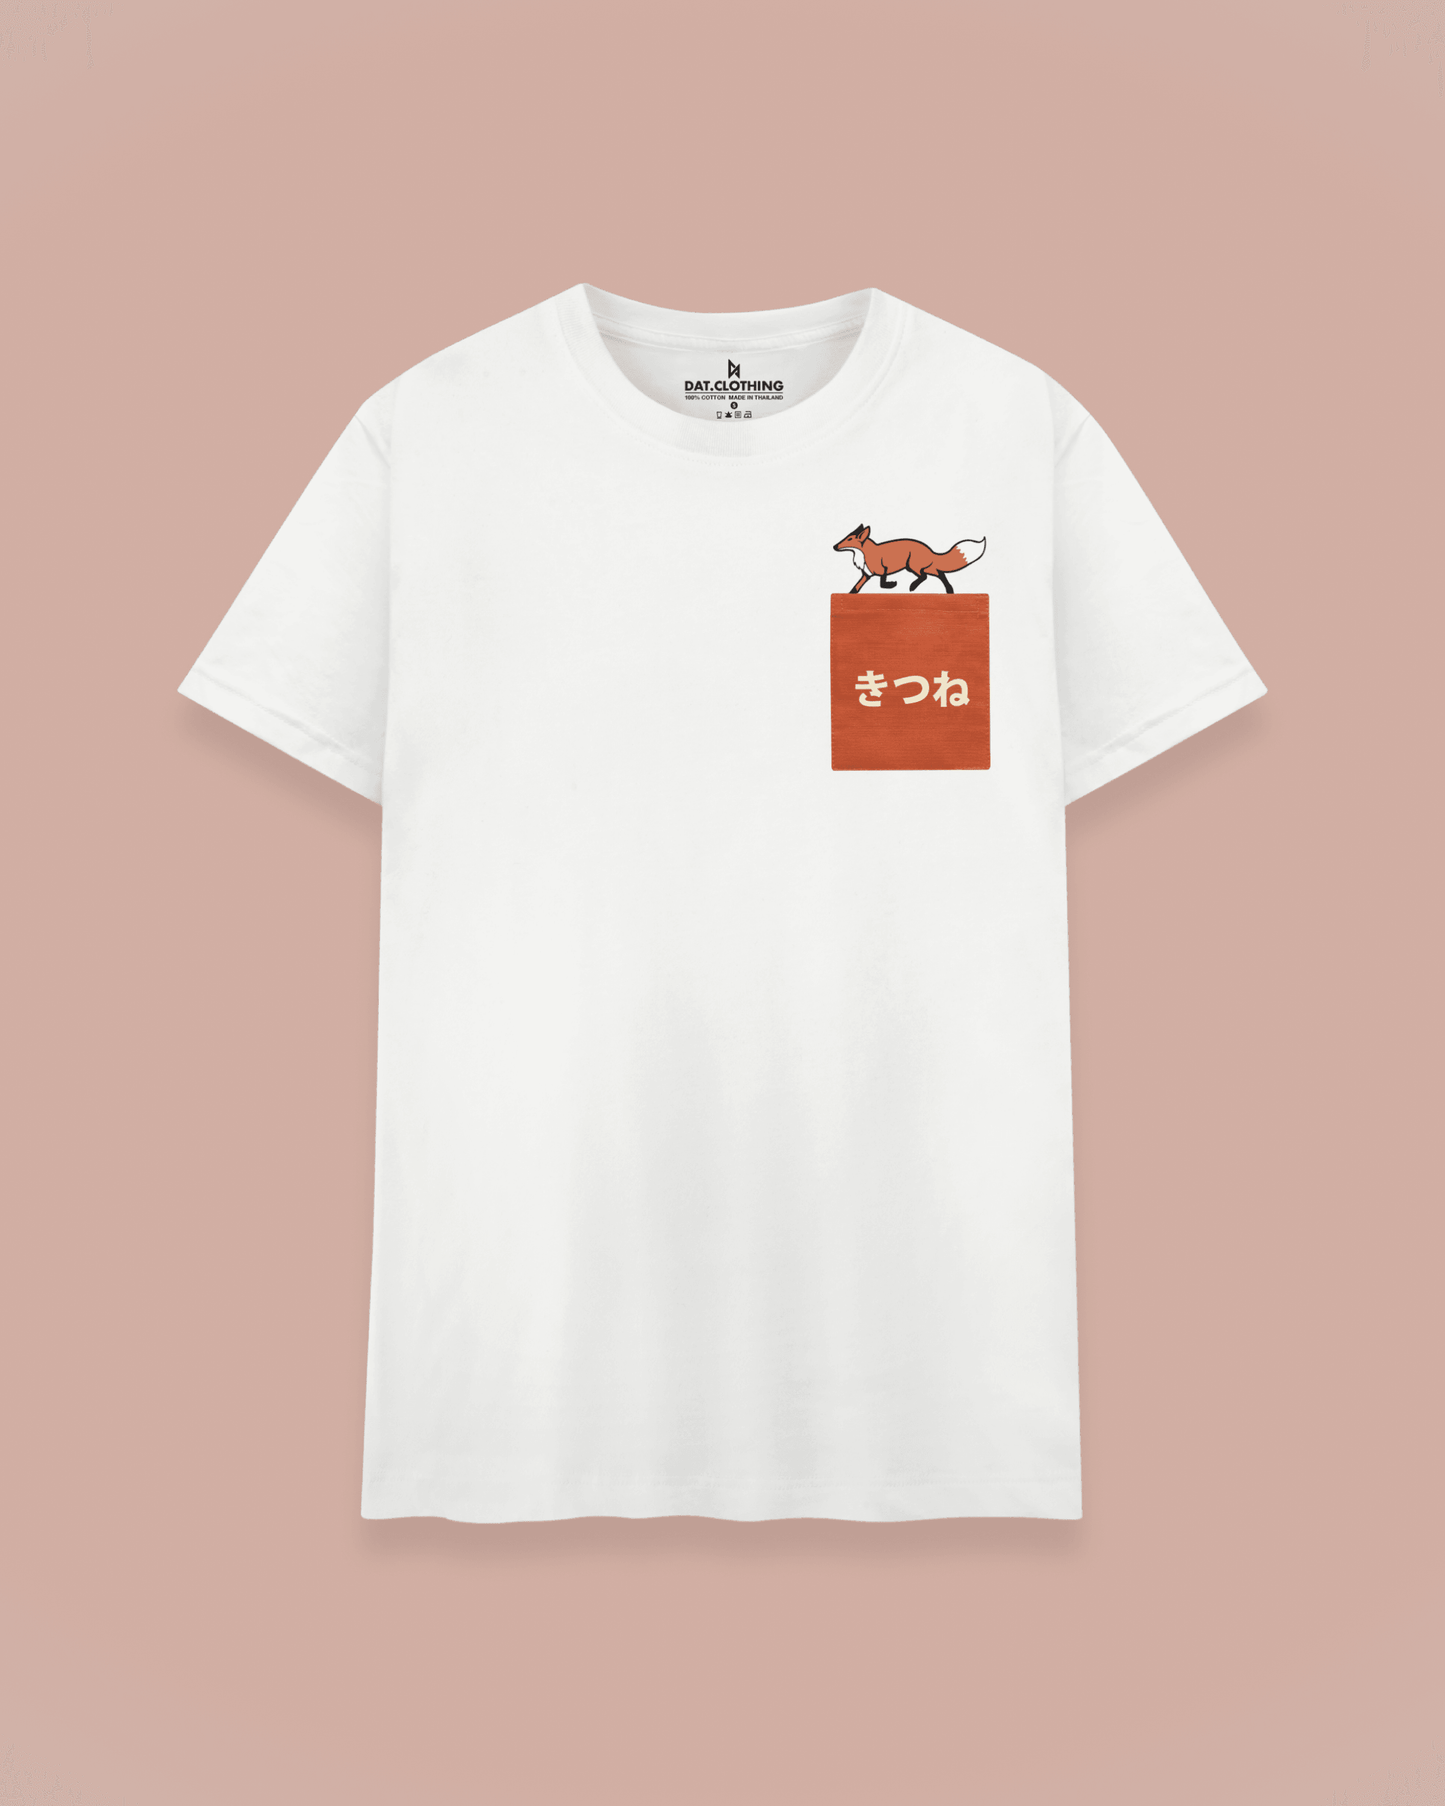 Datclothing - White T-Shirt with Kitsune (fox) print and pocket